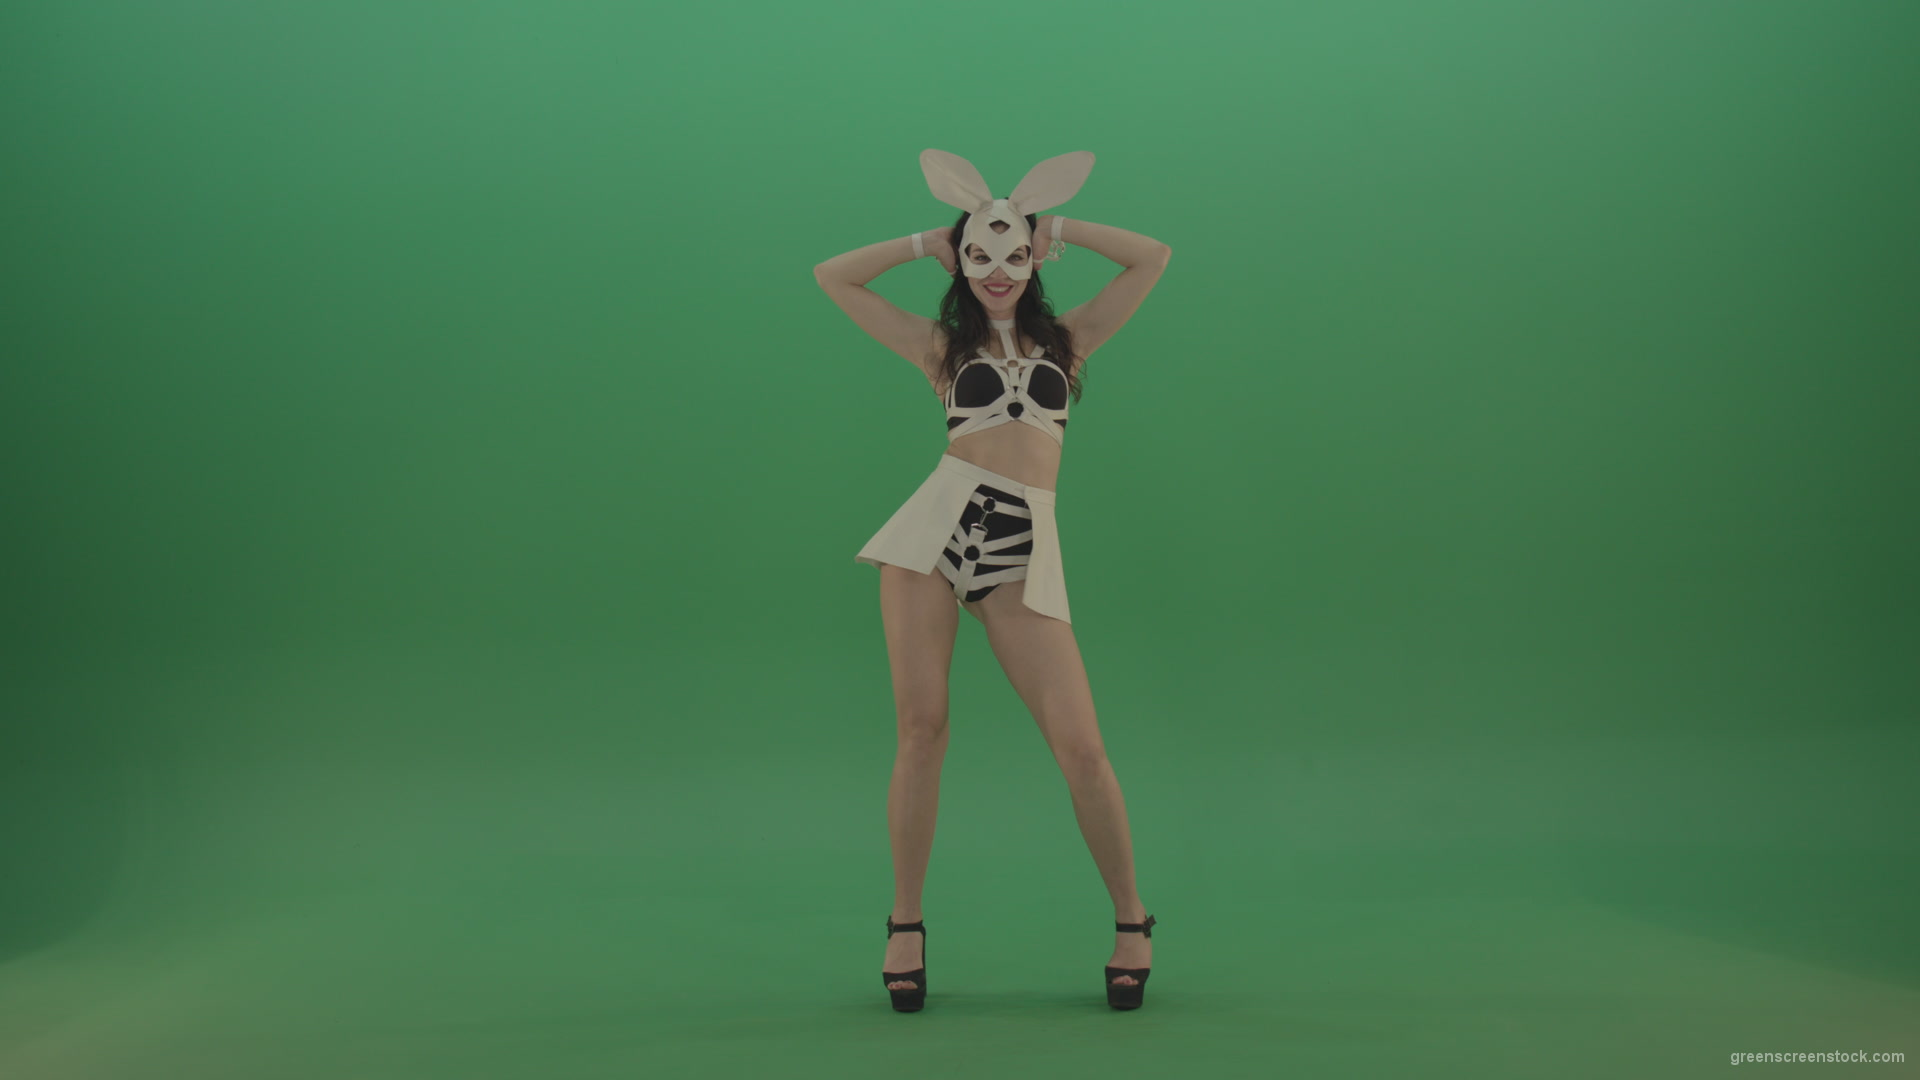 Black-white-sexy-costume-the-girl-moves-the-basin-in-different-directions-on-chromakey-background_009 Green Screen Stock